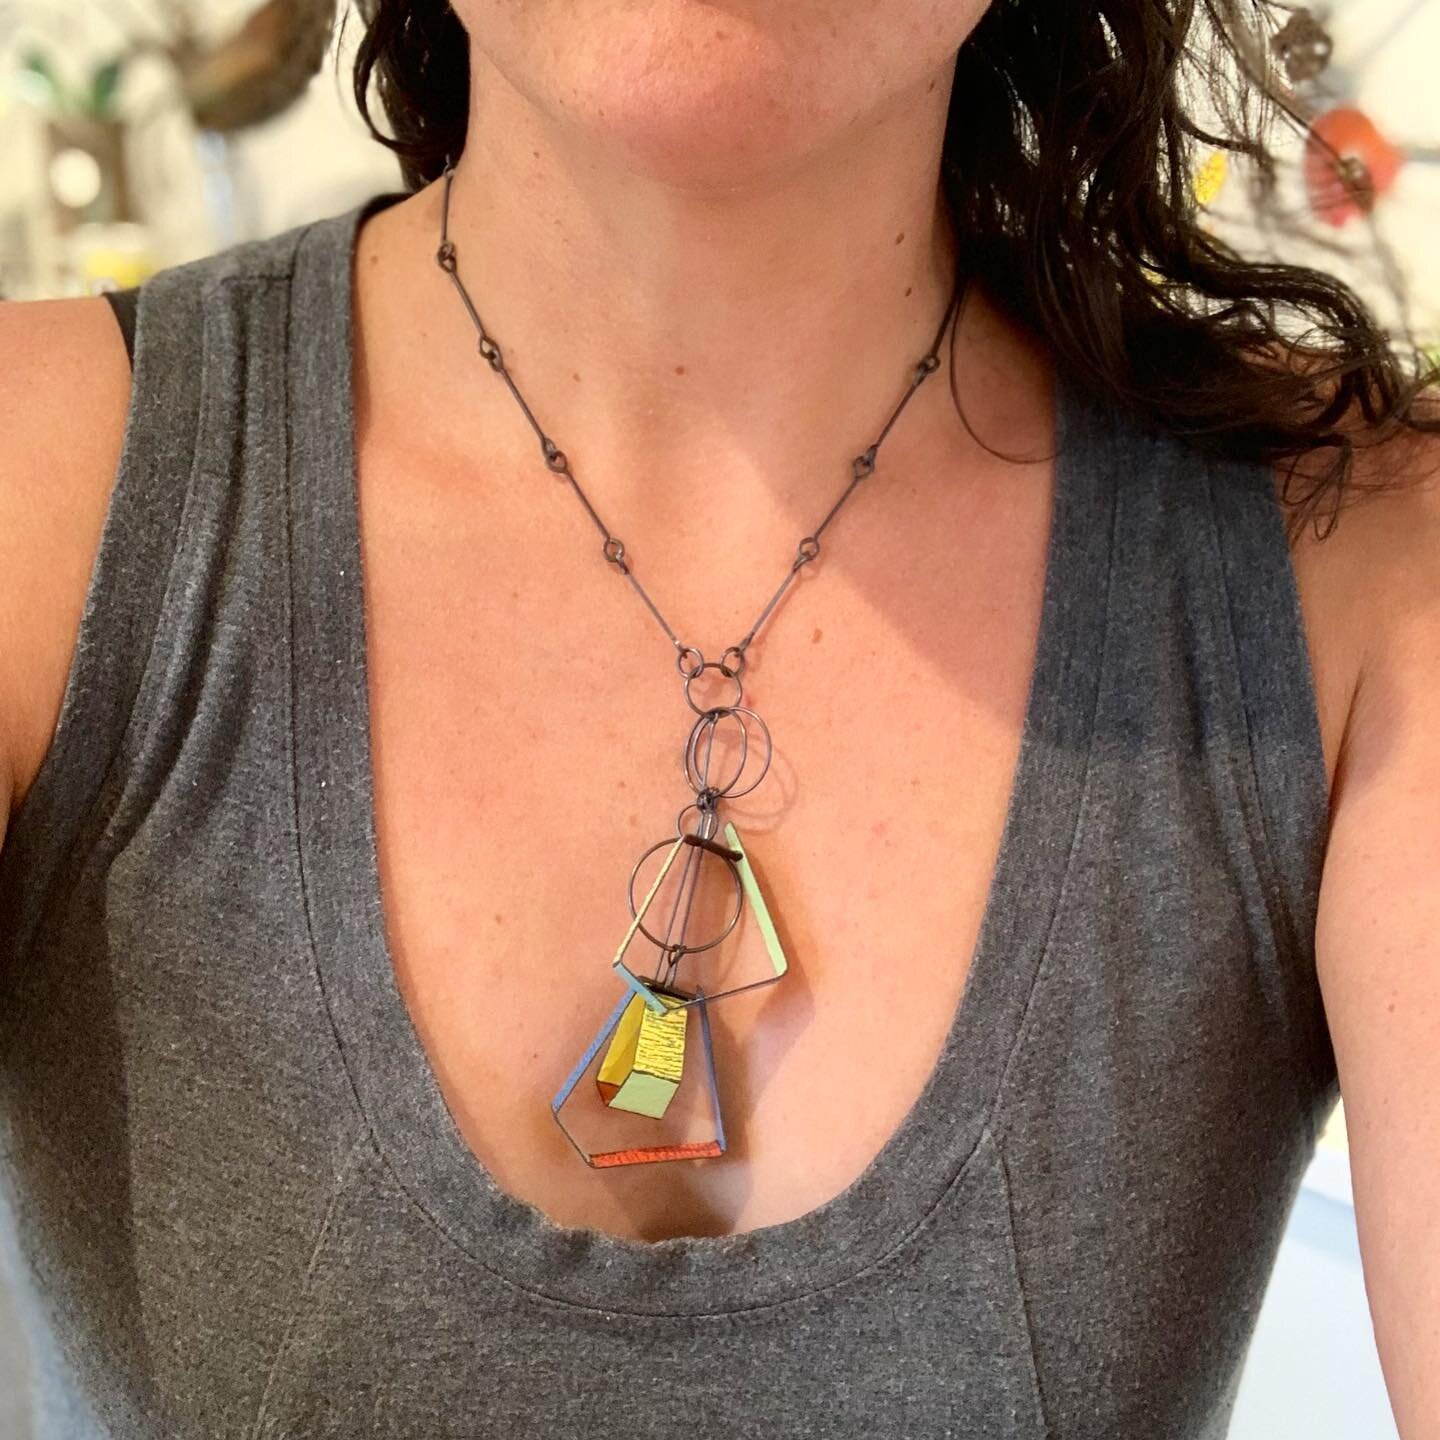 So fun to try on this funky geometric necklace by Mary and Lou Ann! It makes such a difference to see a piece on, especially when it has this much dimension. 
.
.
.
#handcraftedjewelry #jewelrydesign #jewelry